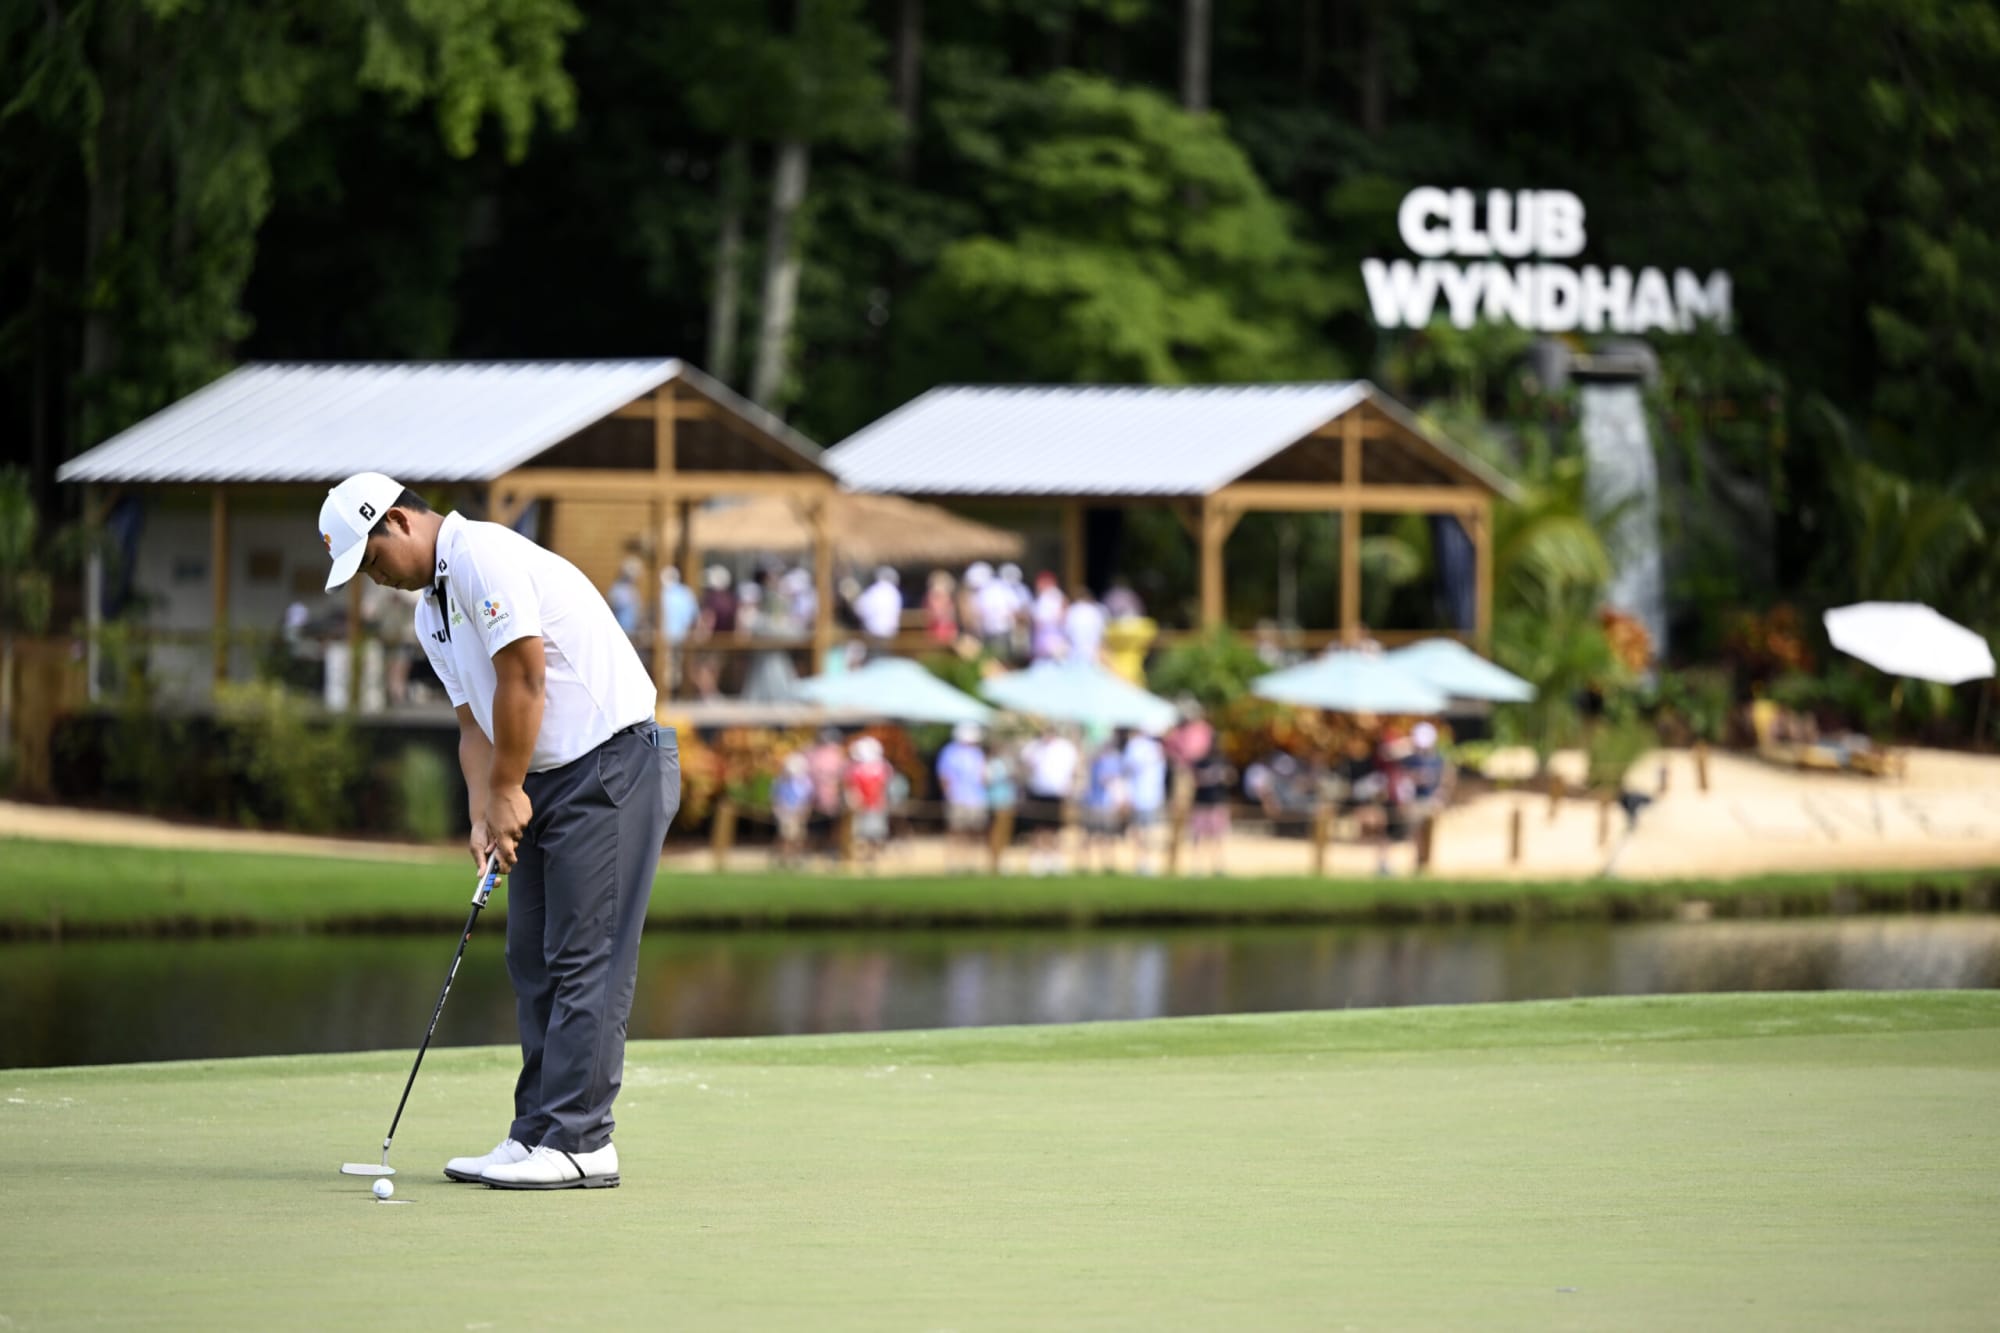 5 Ball-Strikers to Watch Out for at the 2023 Wyndham Championship in Greensboro, NC